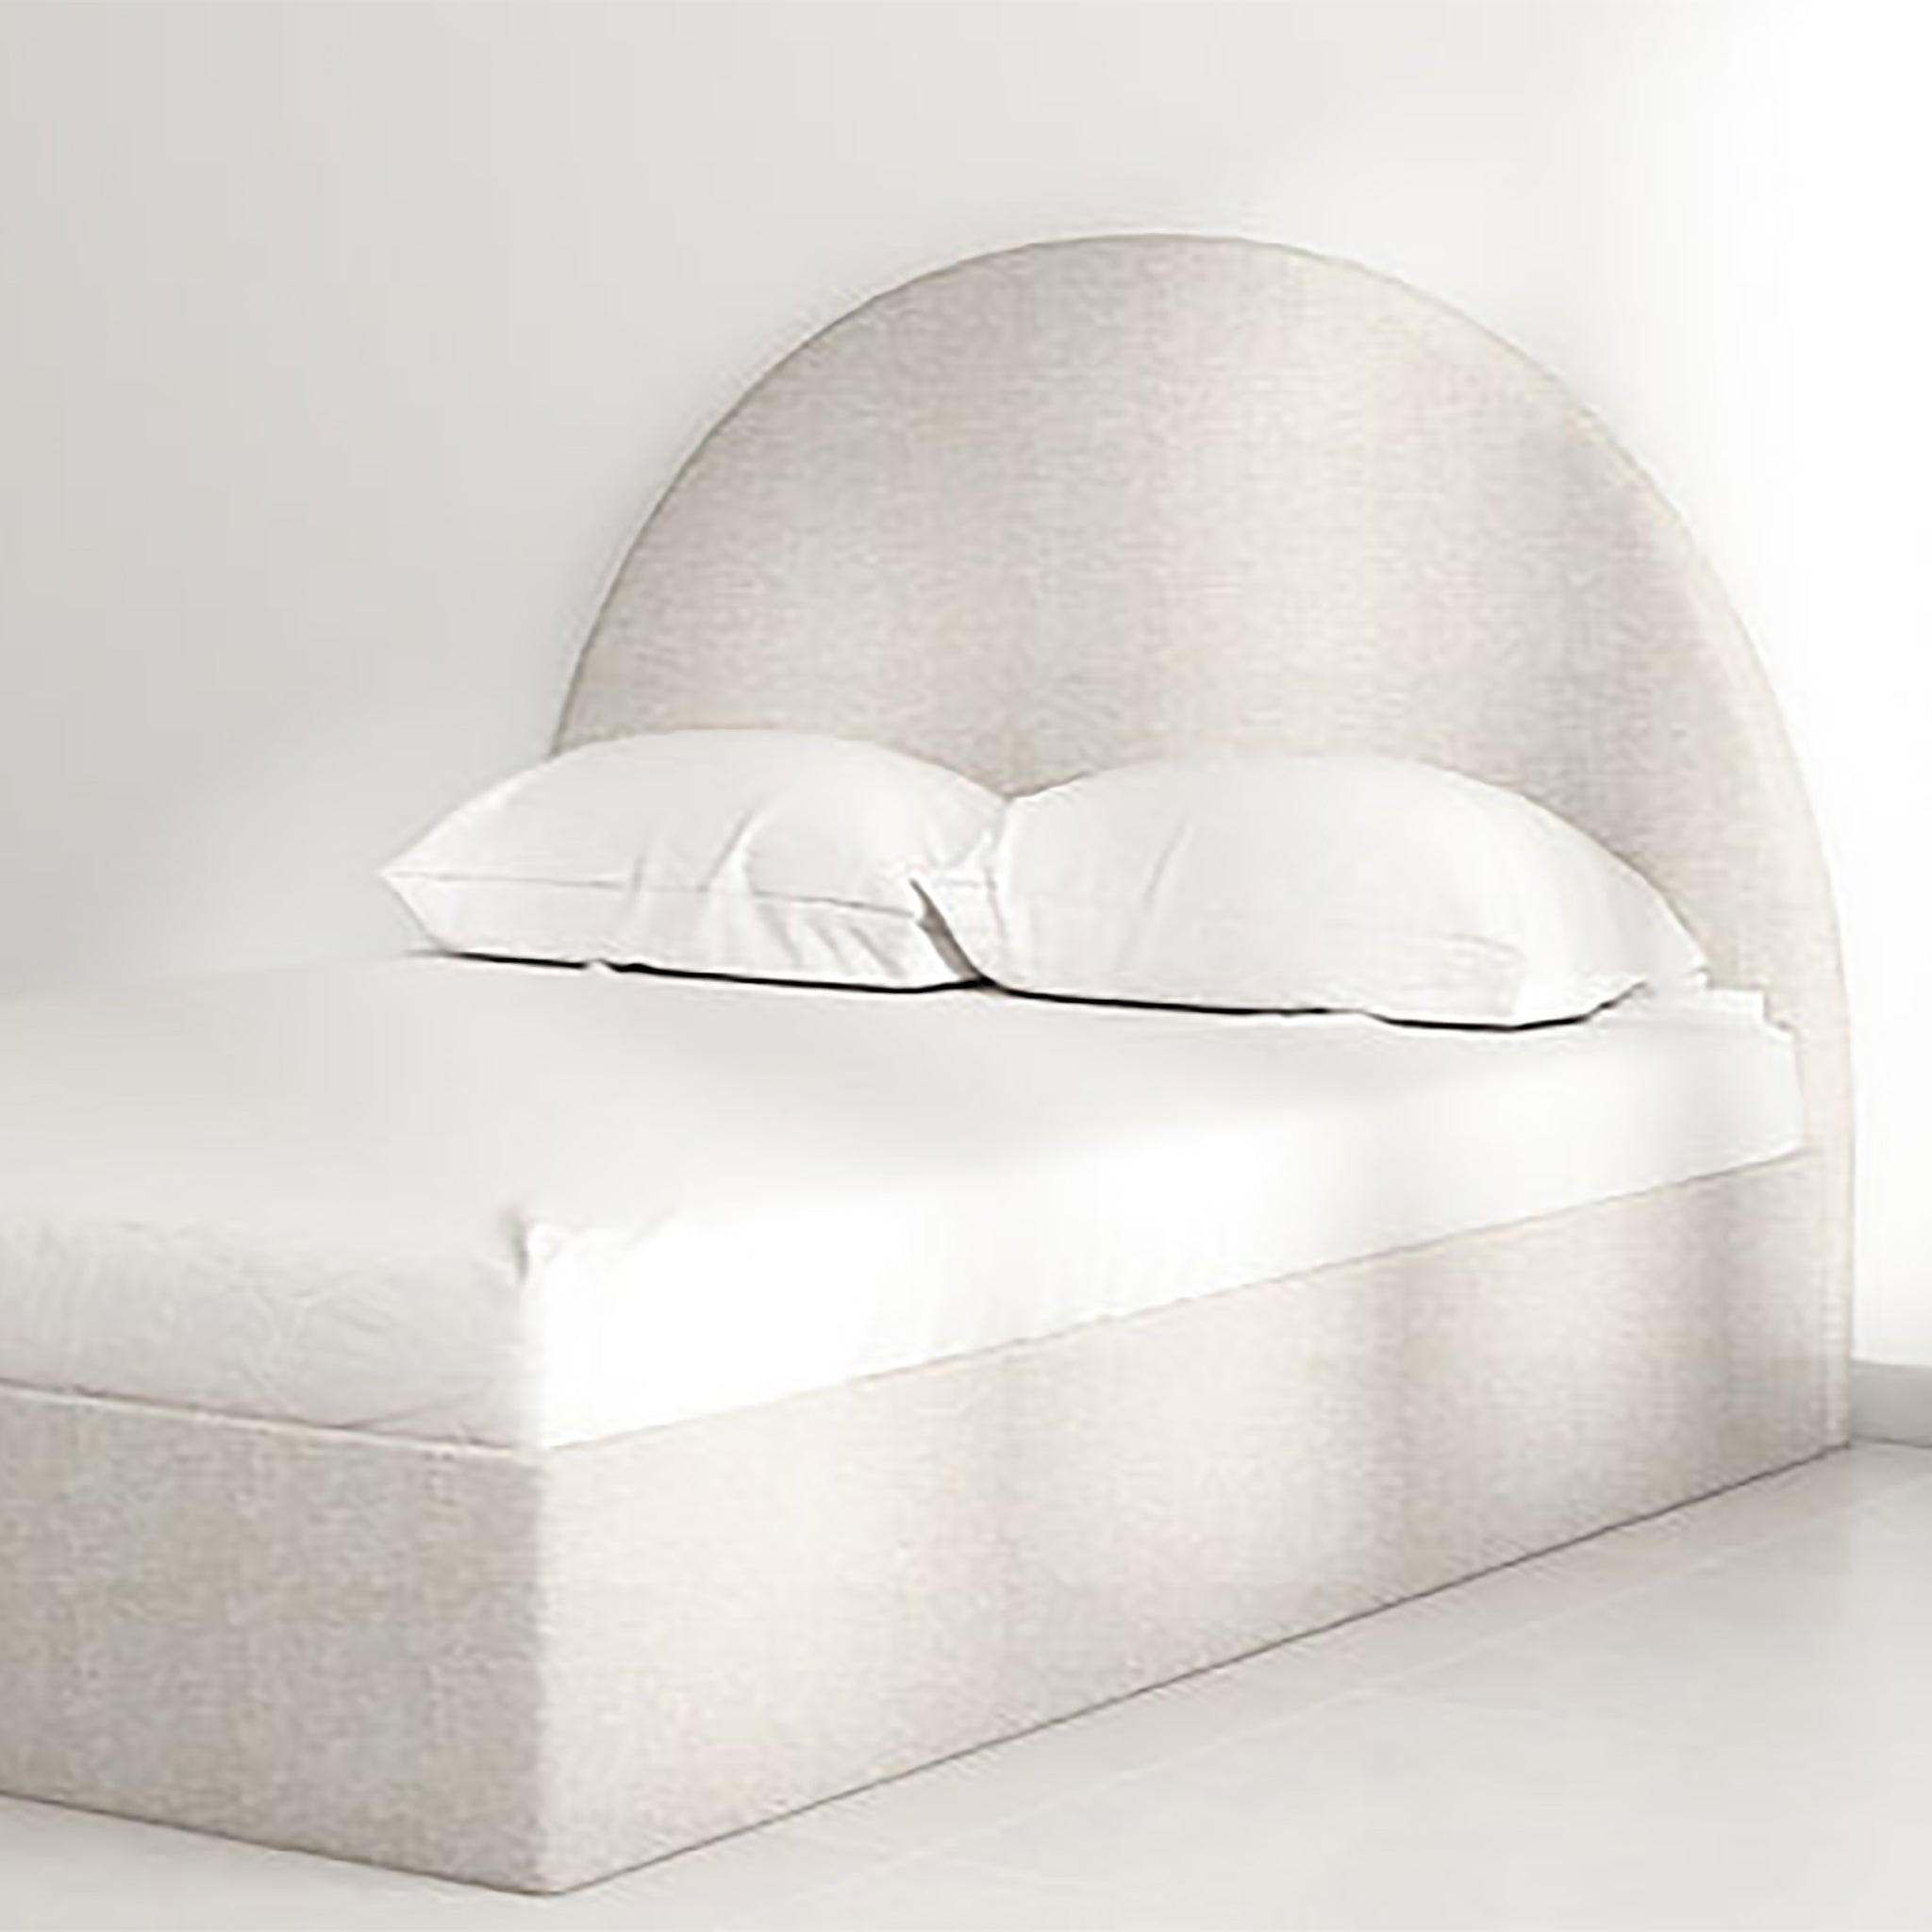 The Archie Bed with a luxurious curved headboard in light beige high-quality upholstery. Modern and compact design, perfect for tight spaces, master bedrooms, and guest rooms. Stylish and space-saving furniture for contemporary living.